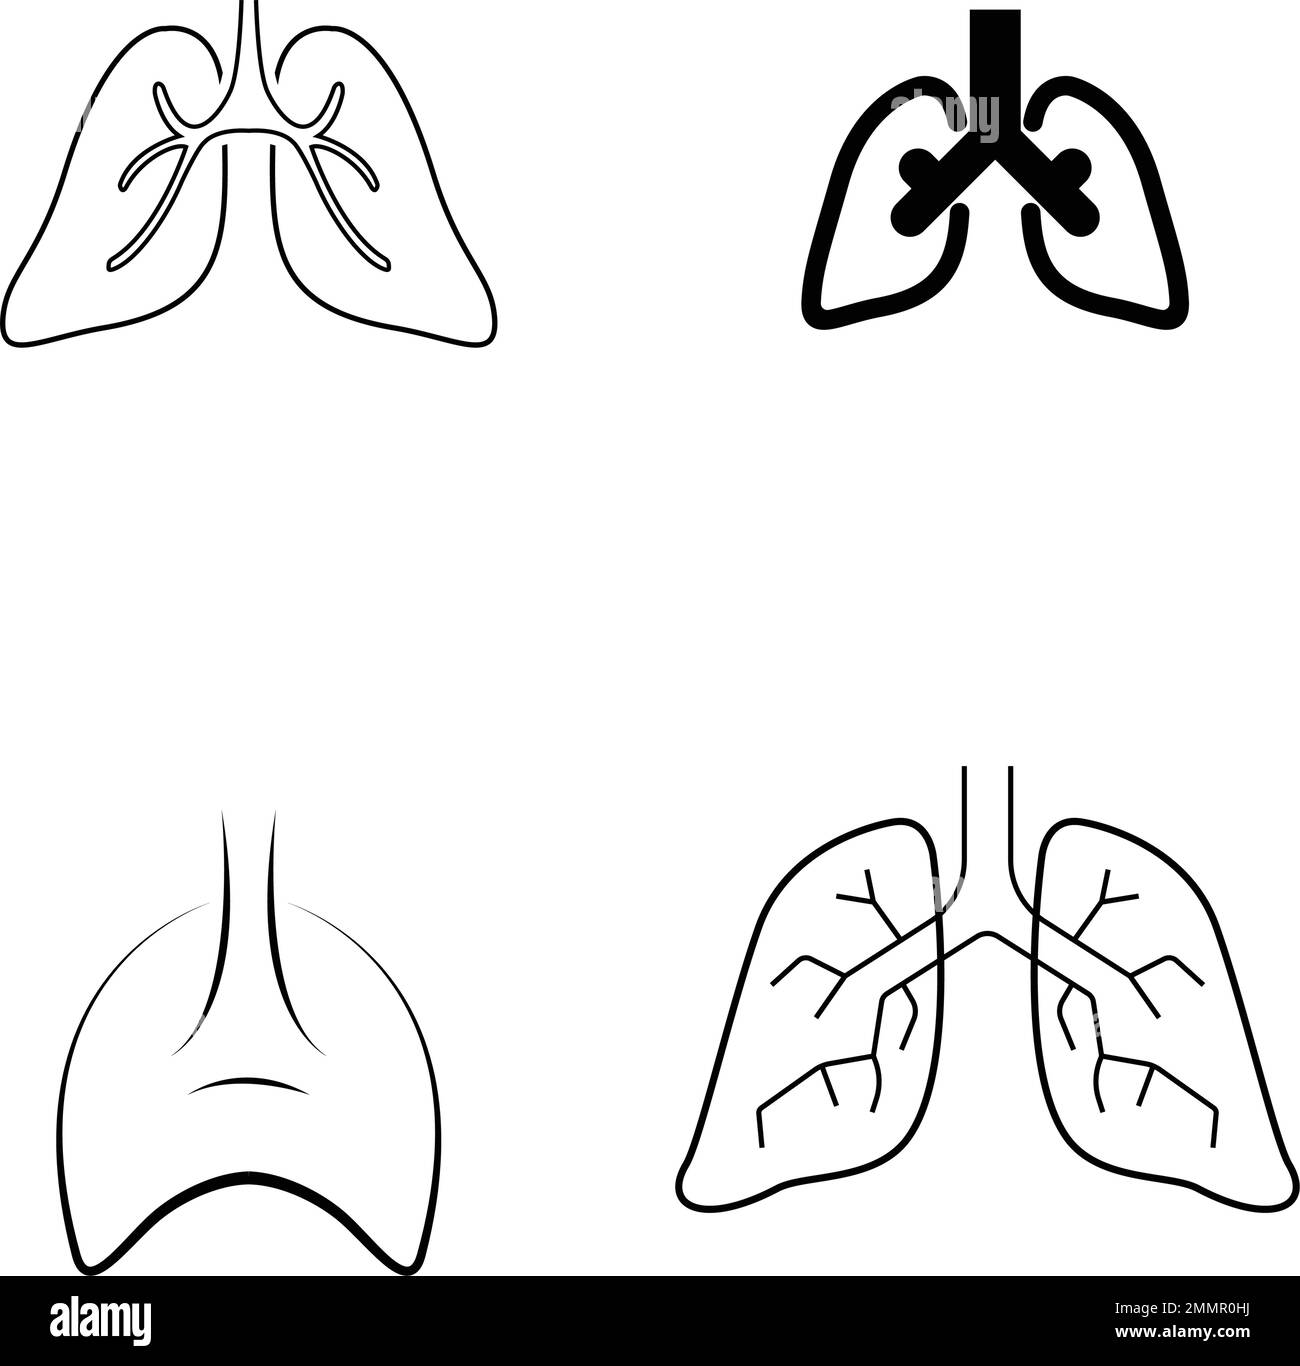 lungs icon stock illustration design Stock Vector